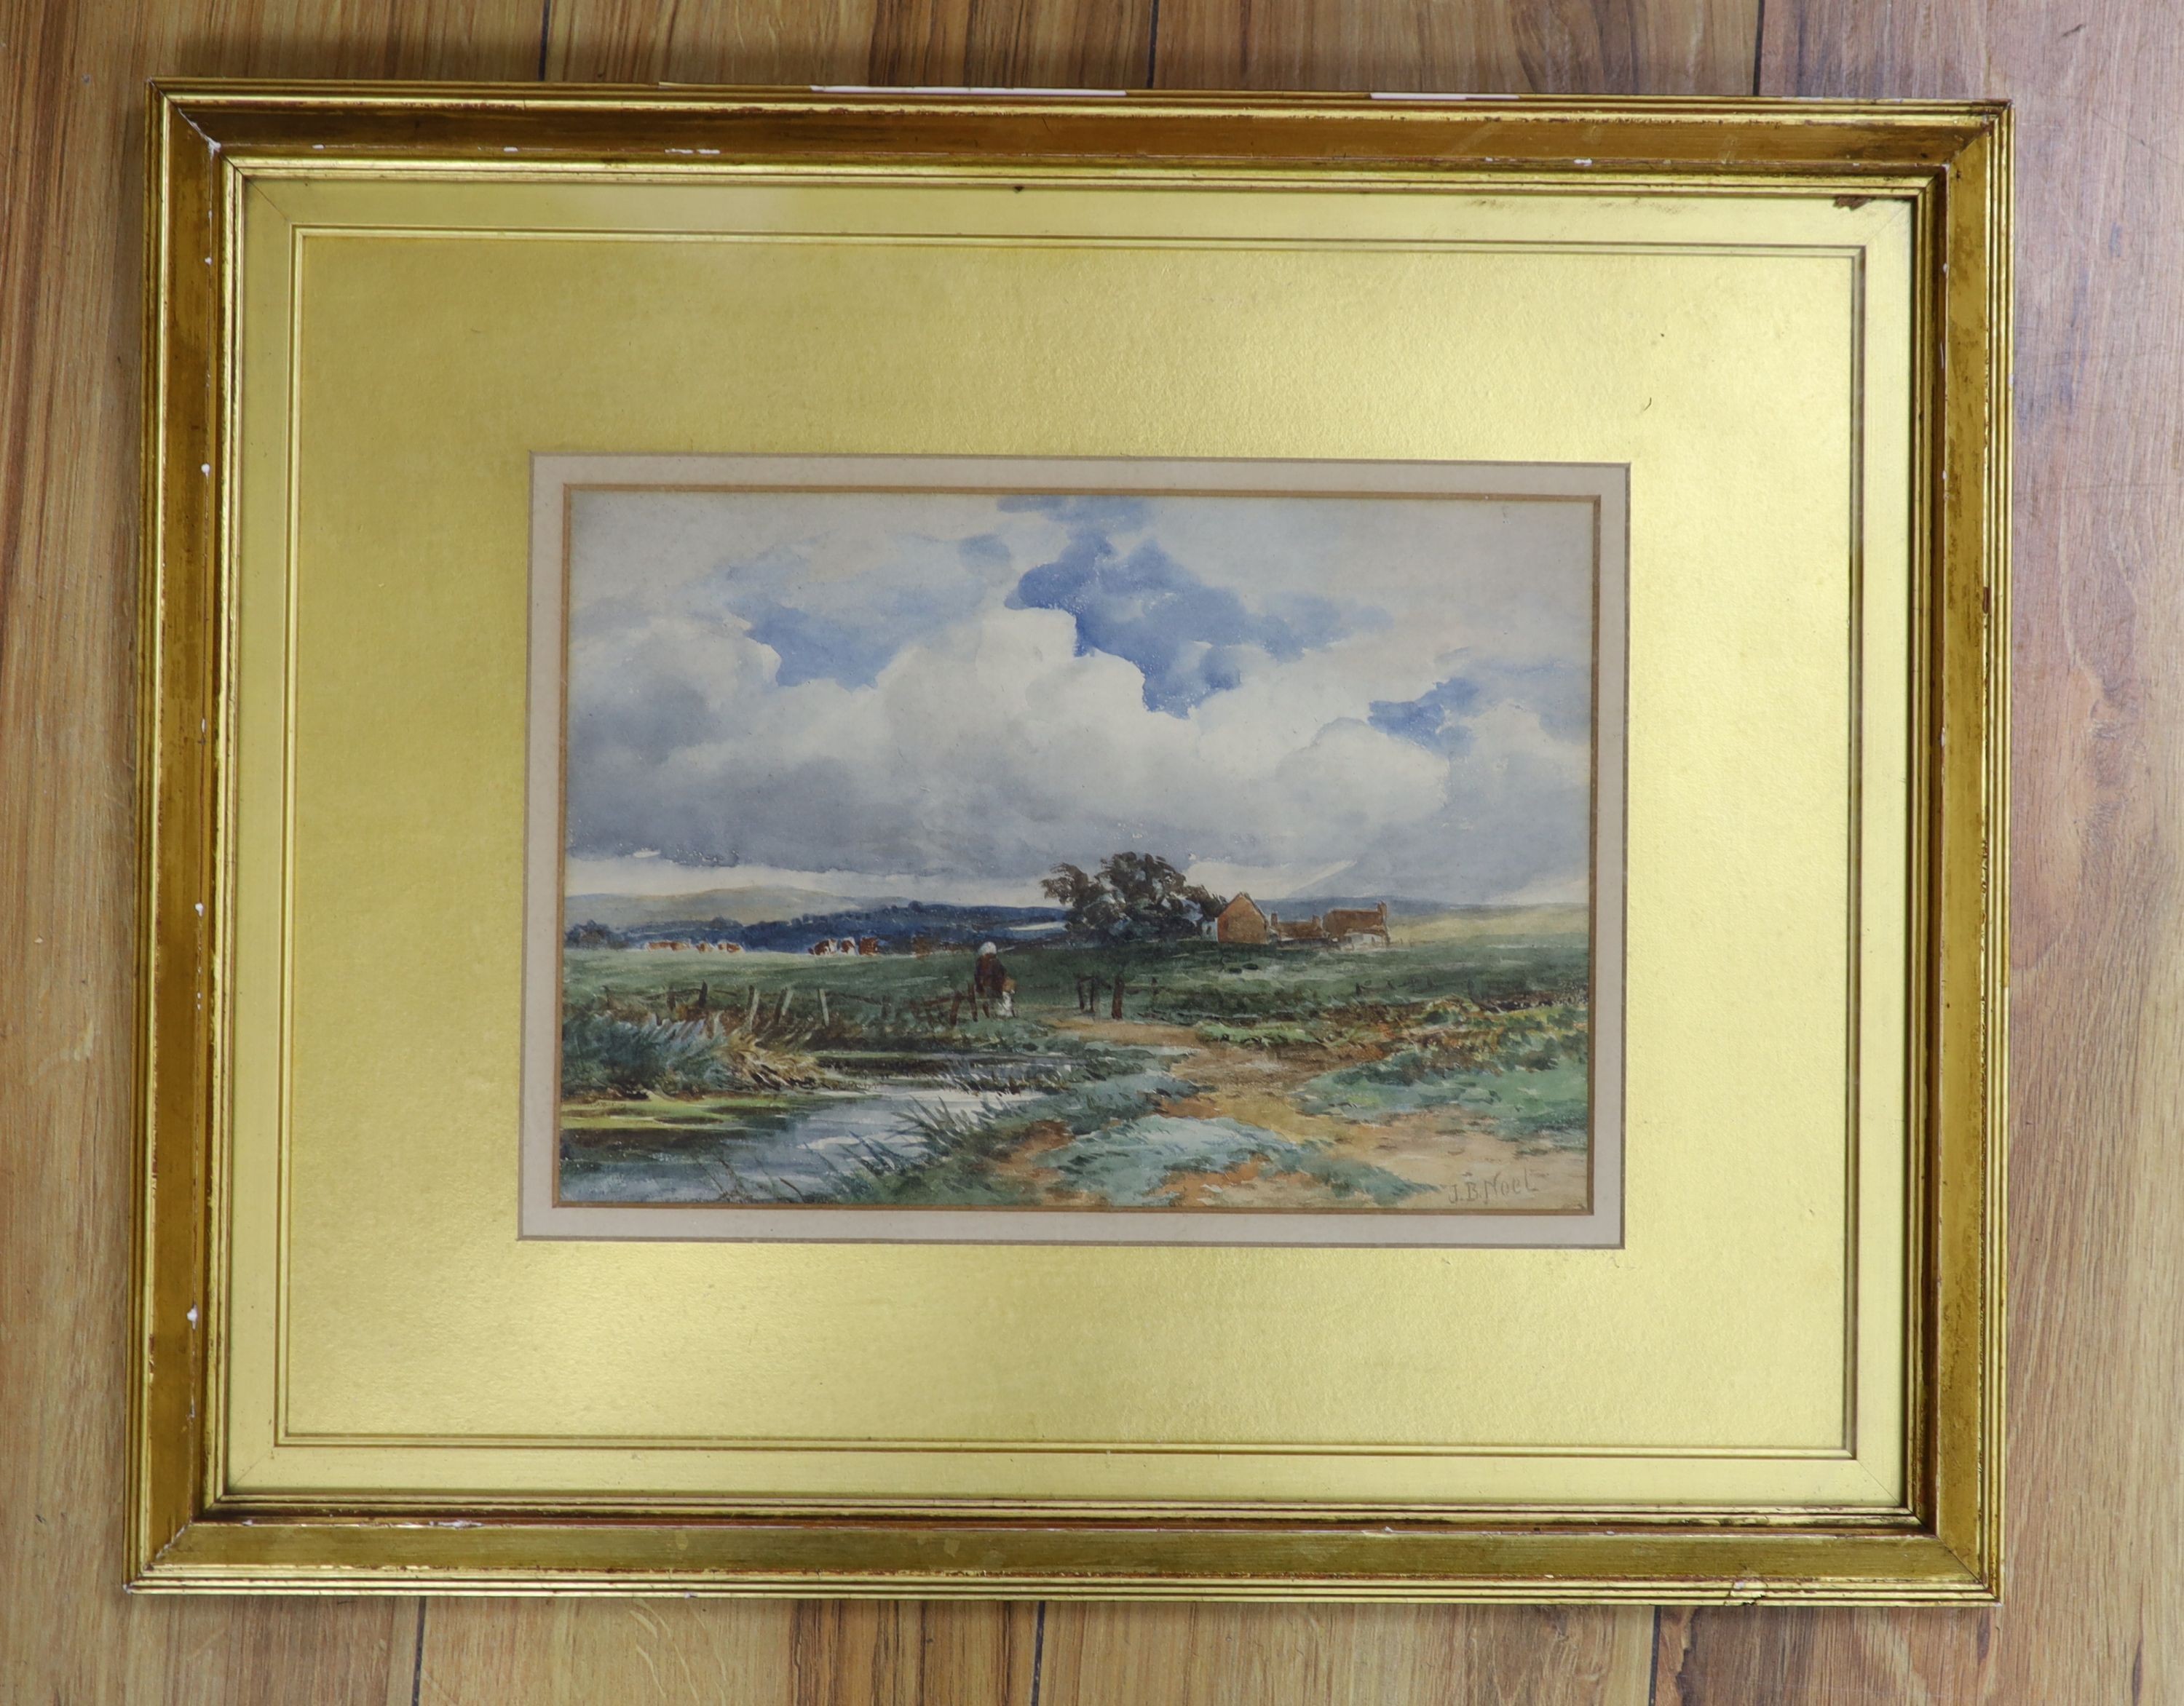 J.B. Noel, watercolour, Landscape with figure and cattle, signed, 18 x 26cm